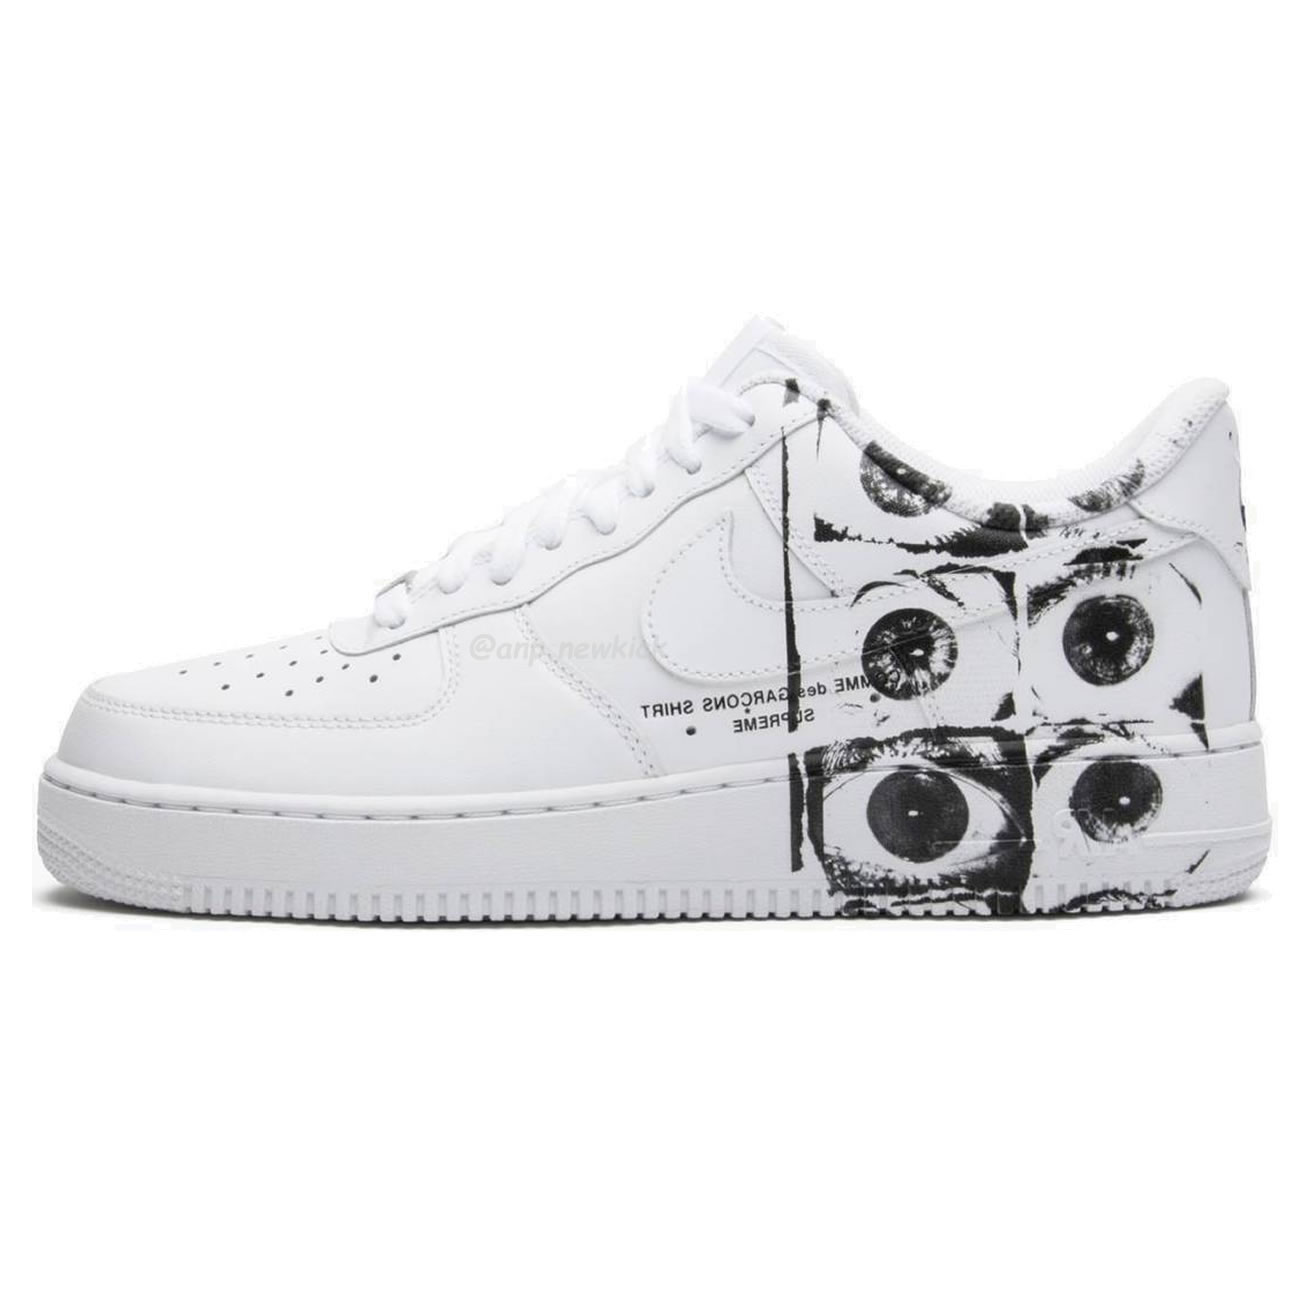 Nike Air Force 1 Low Supreme Comme Des Garcons 923044 100 (1) - newkick.org